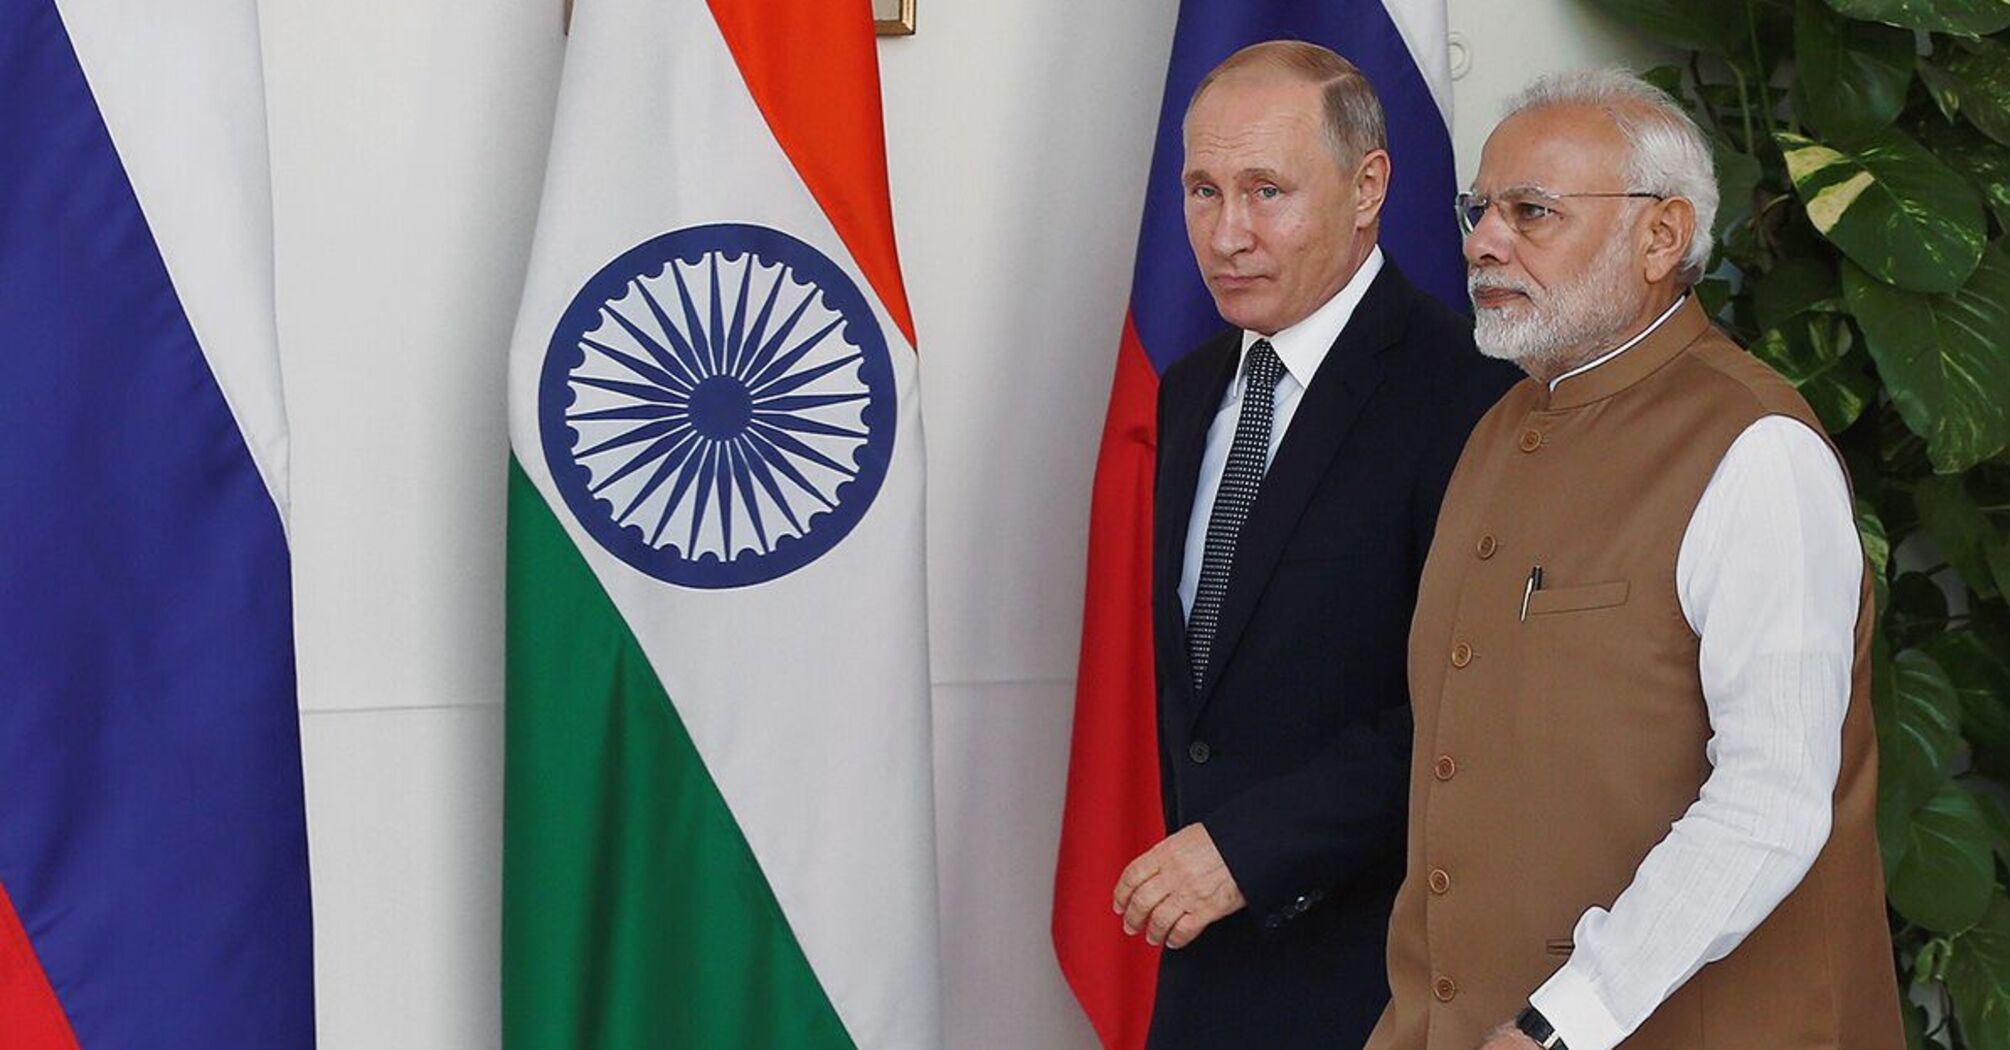 Modi to ask Putin for release of Indian citizens tricked into Russian army - Reuters